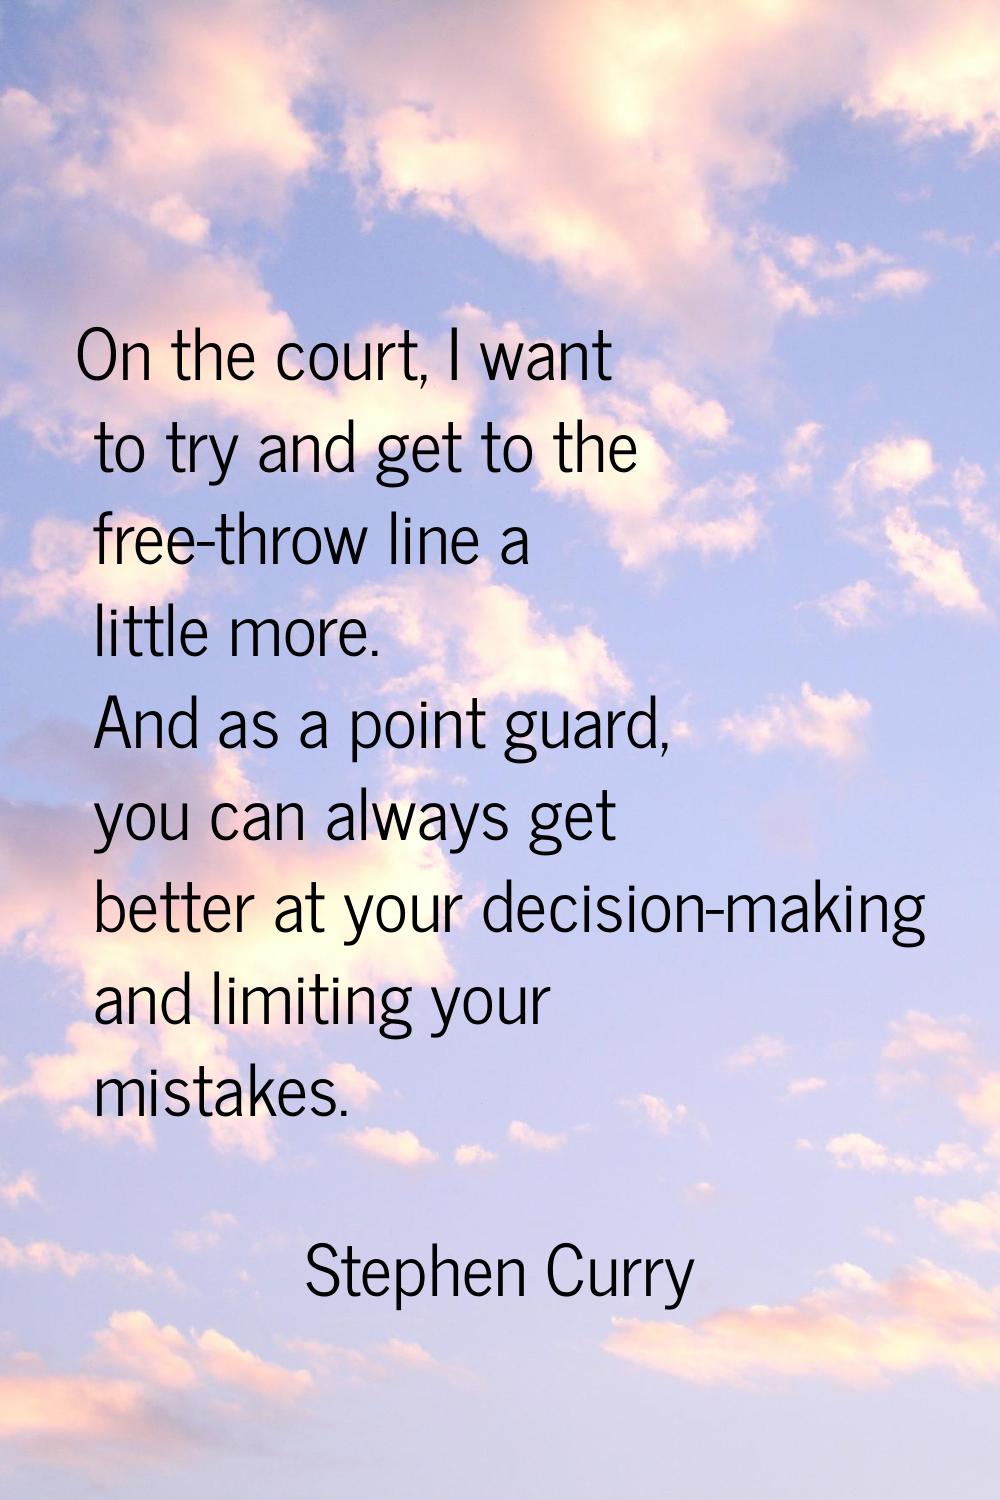 On the court, I want to try and get to the free-throw line a little more. And as a point guard, you